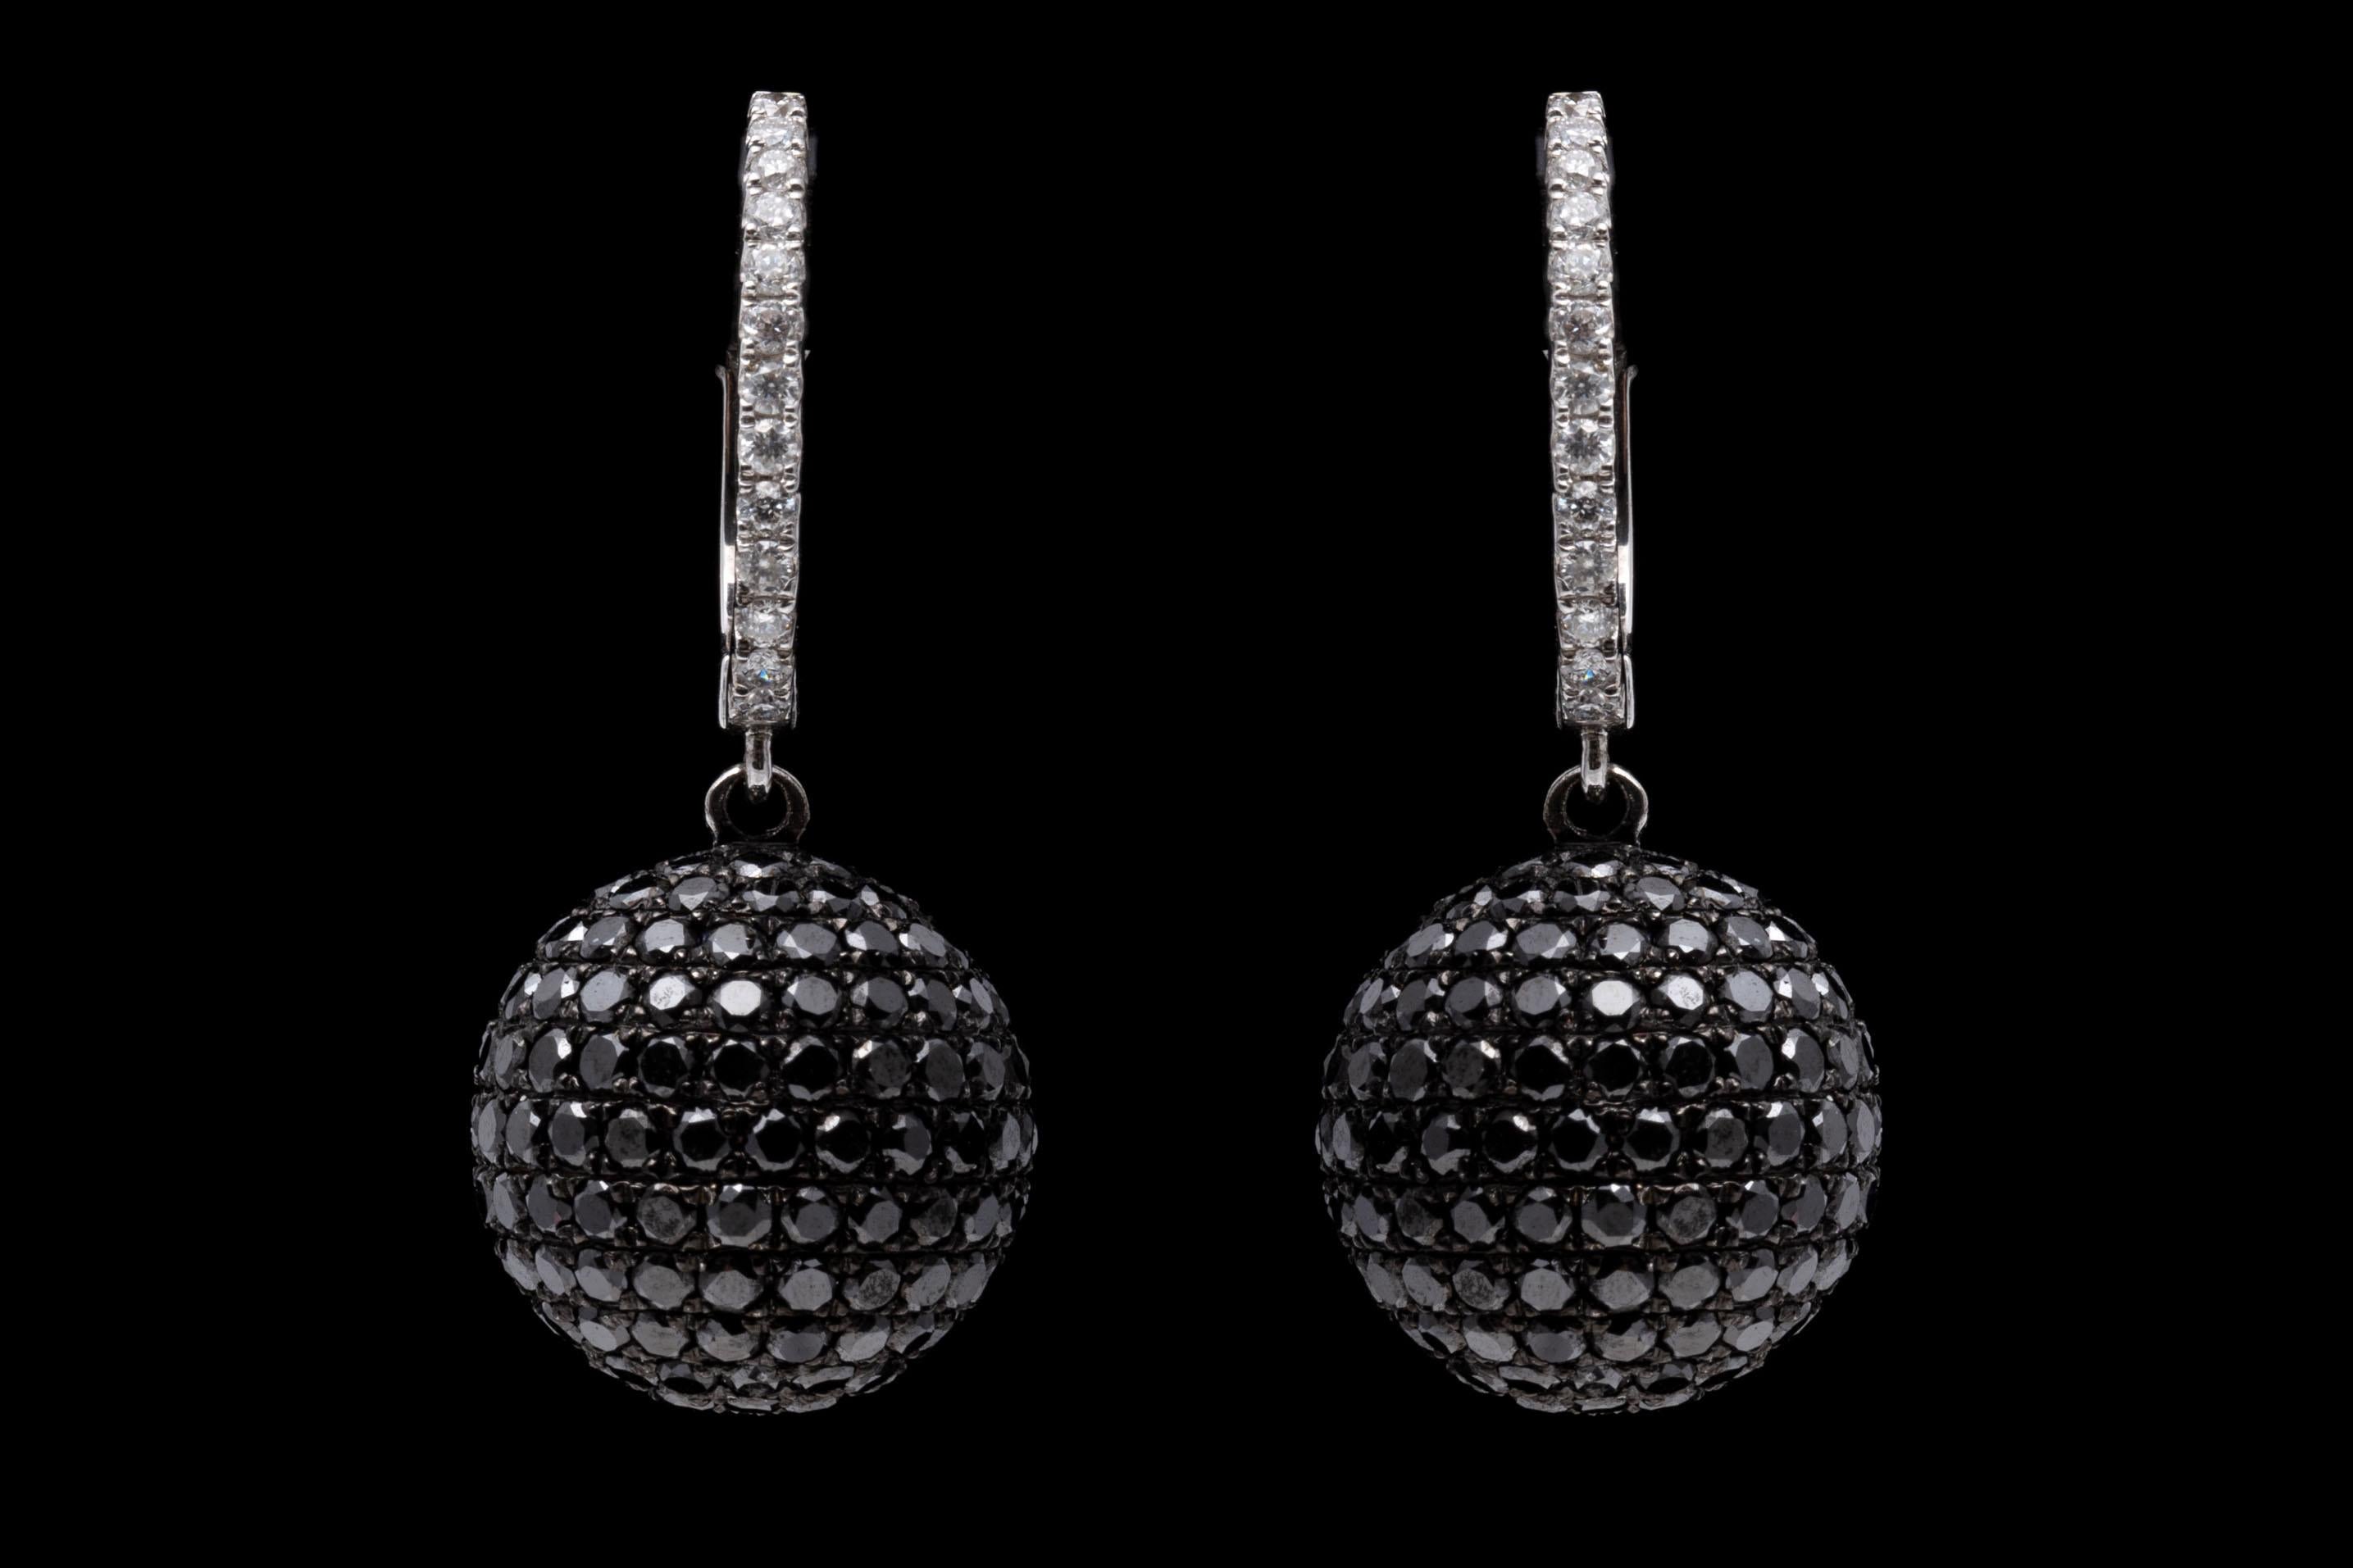 This ultra modern pair of 14K white gold earrings features a ball pendant pave set with black diamonds. White diamonds are set into the tops of the earrings complimenting the many black diamond creating a elegant appearance. Diamonds are